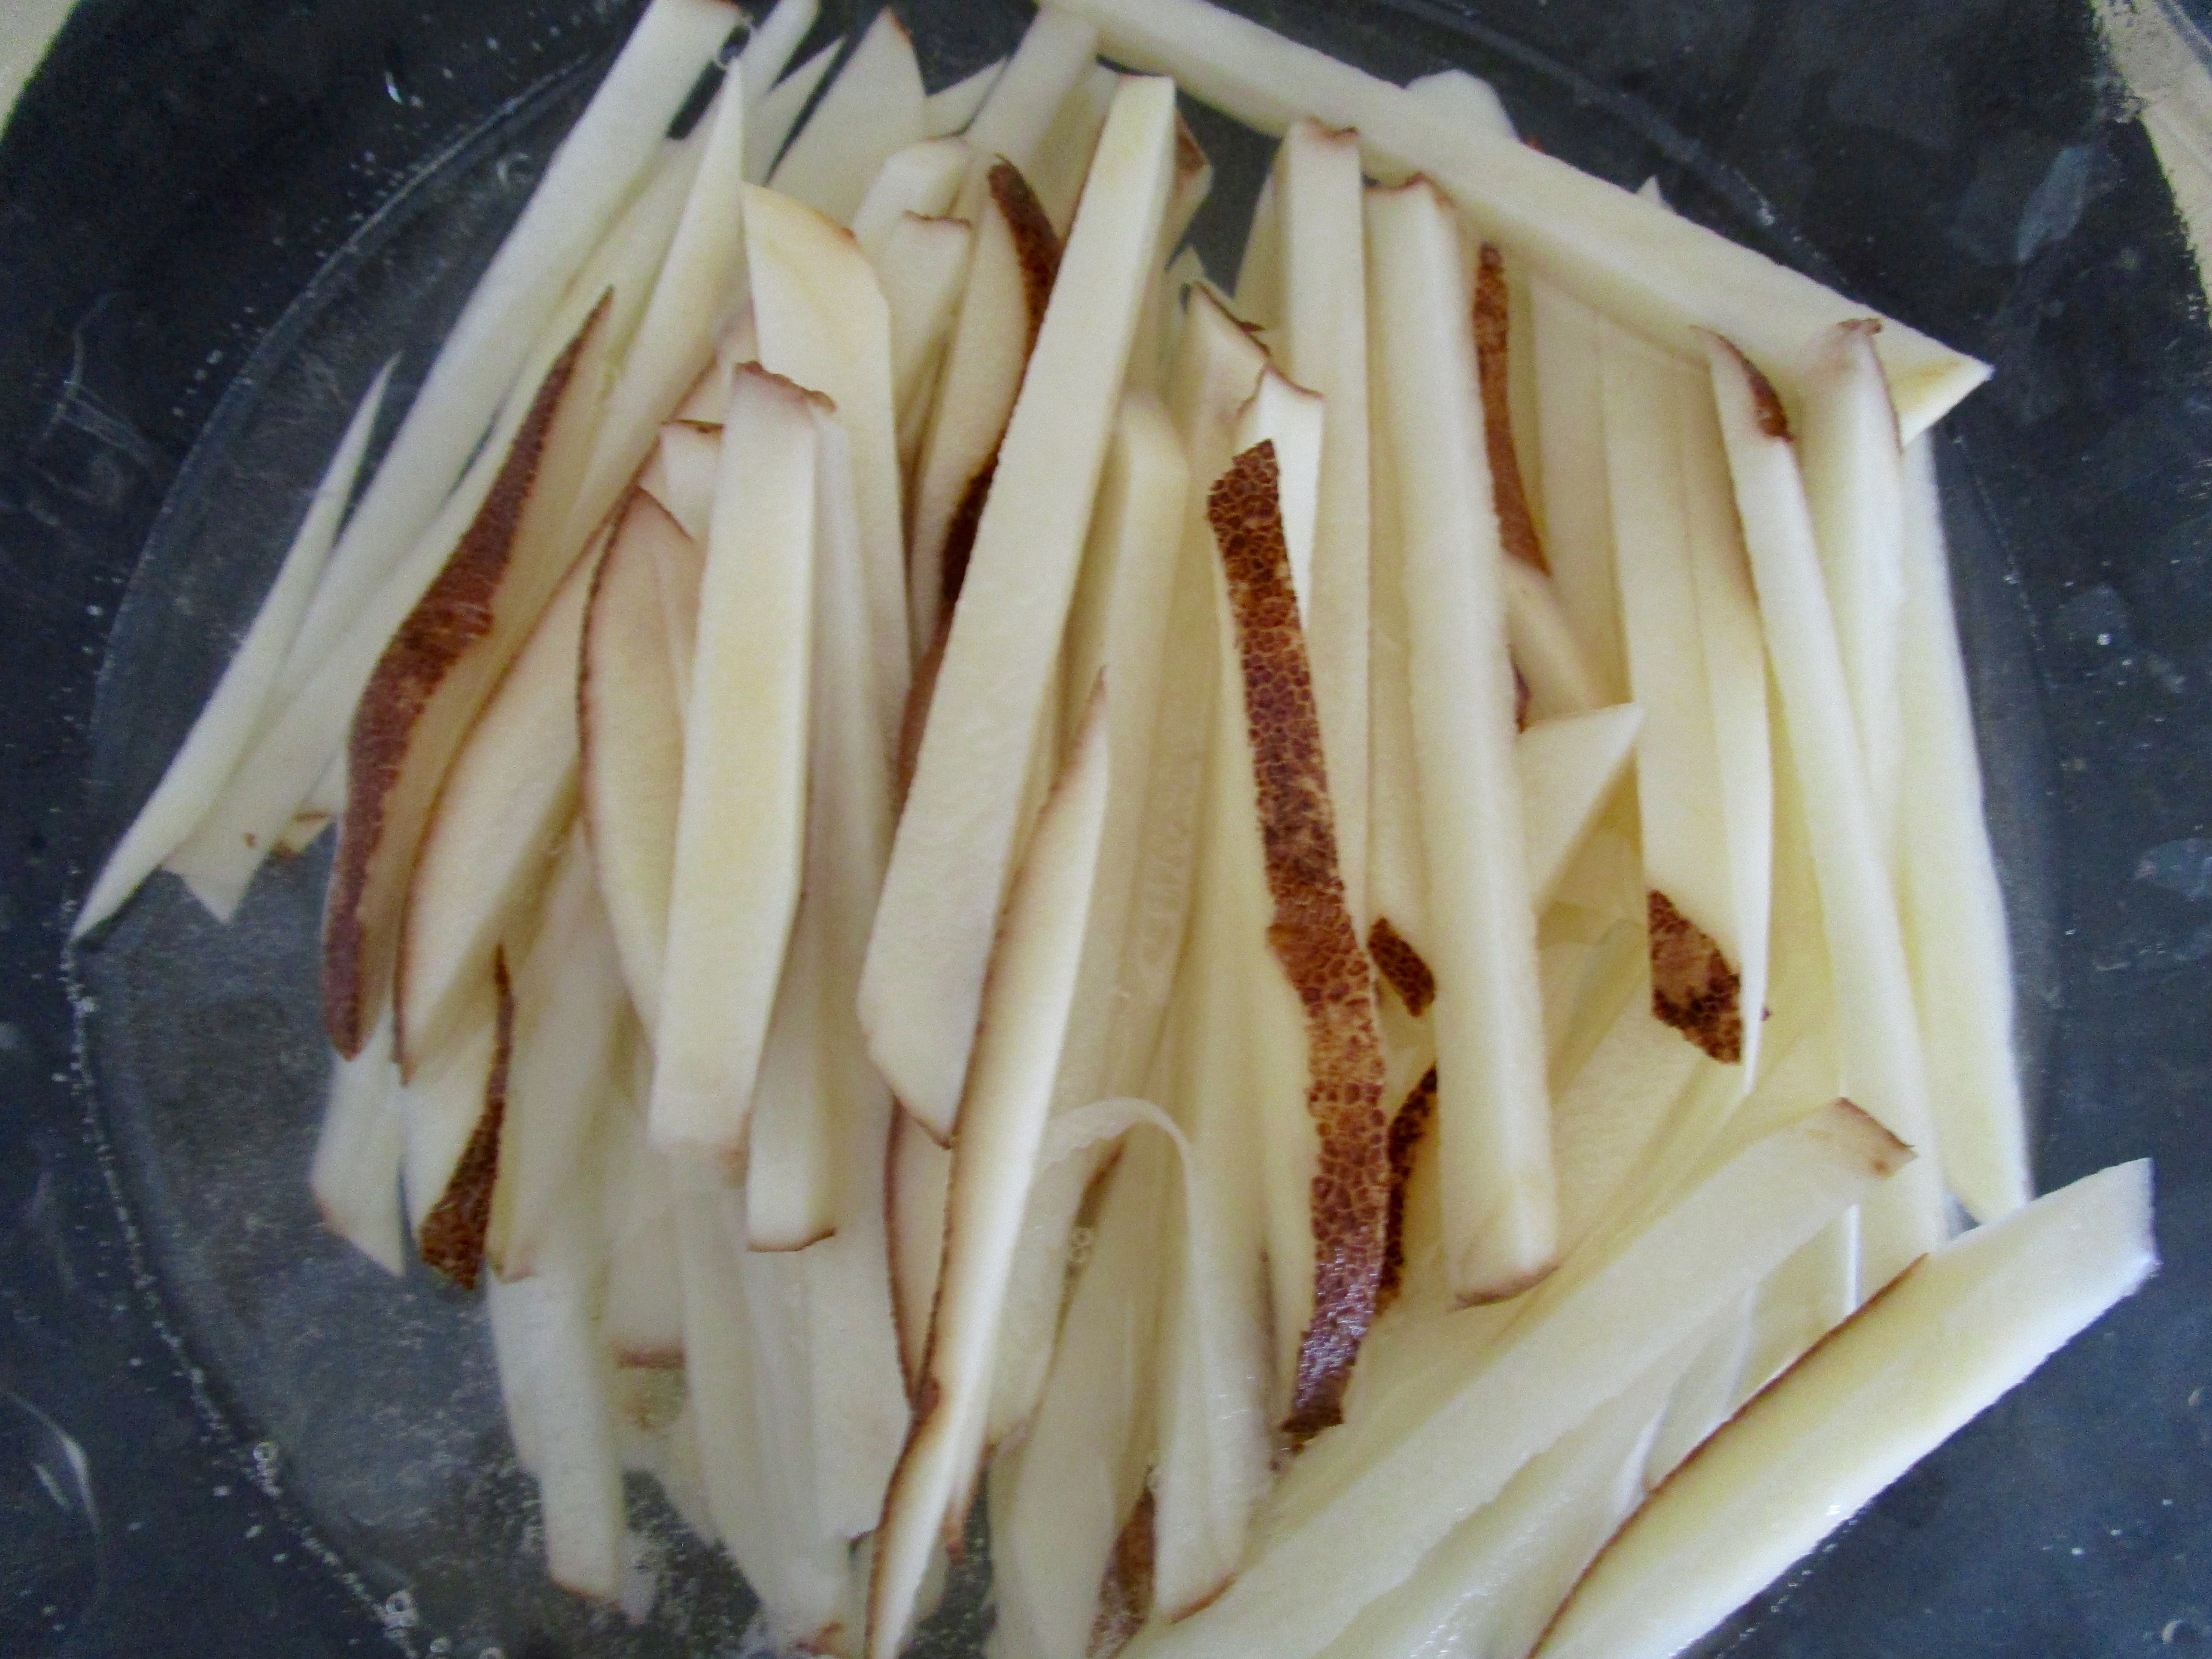 After cutting potatoes into 1/3 inch slices, cut each slice into  1/3-inch wide strips.